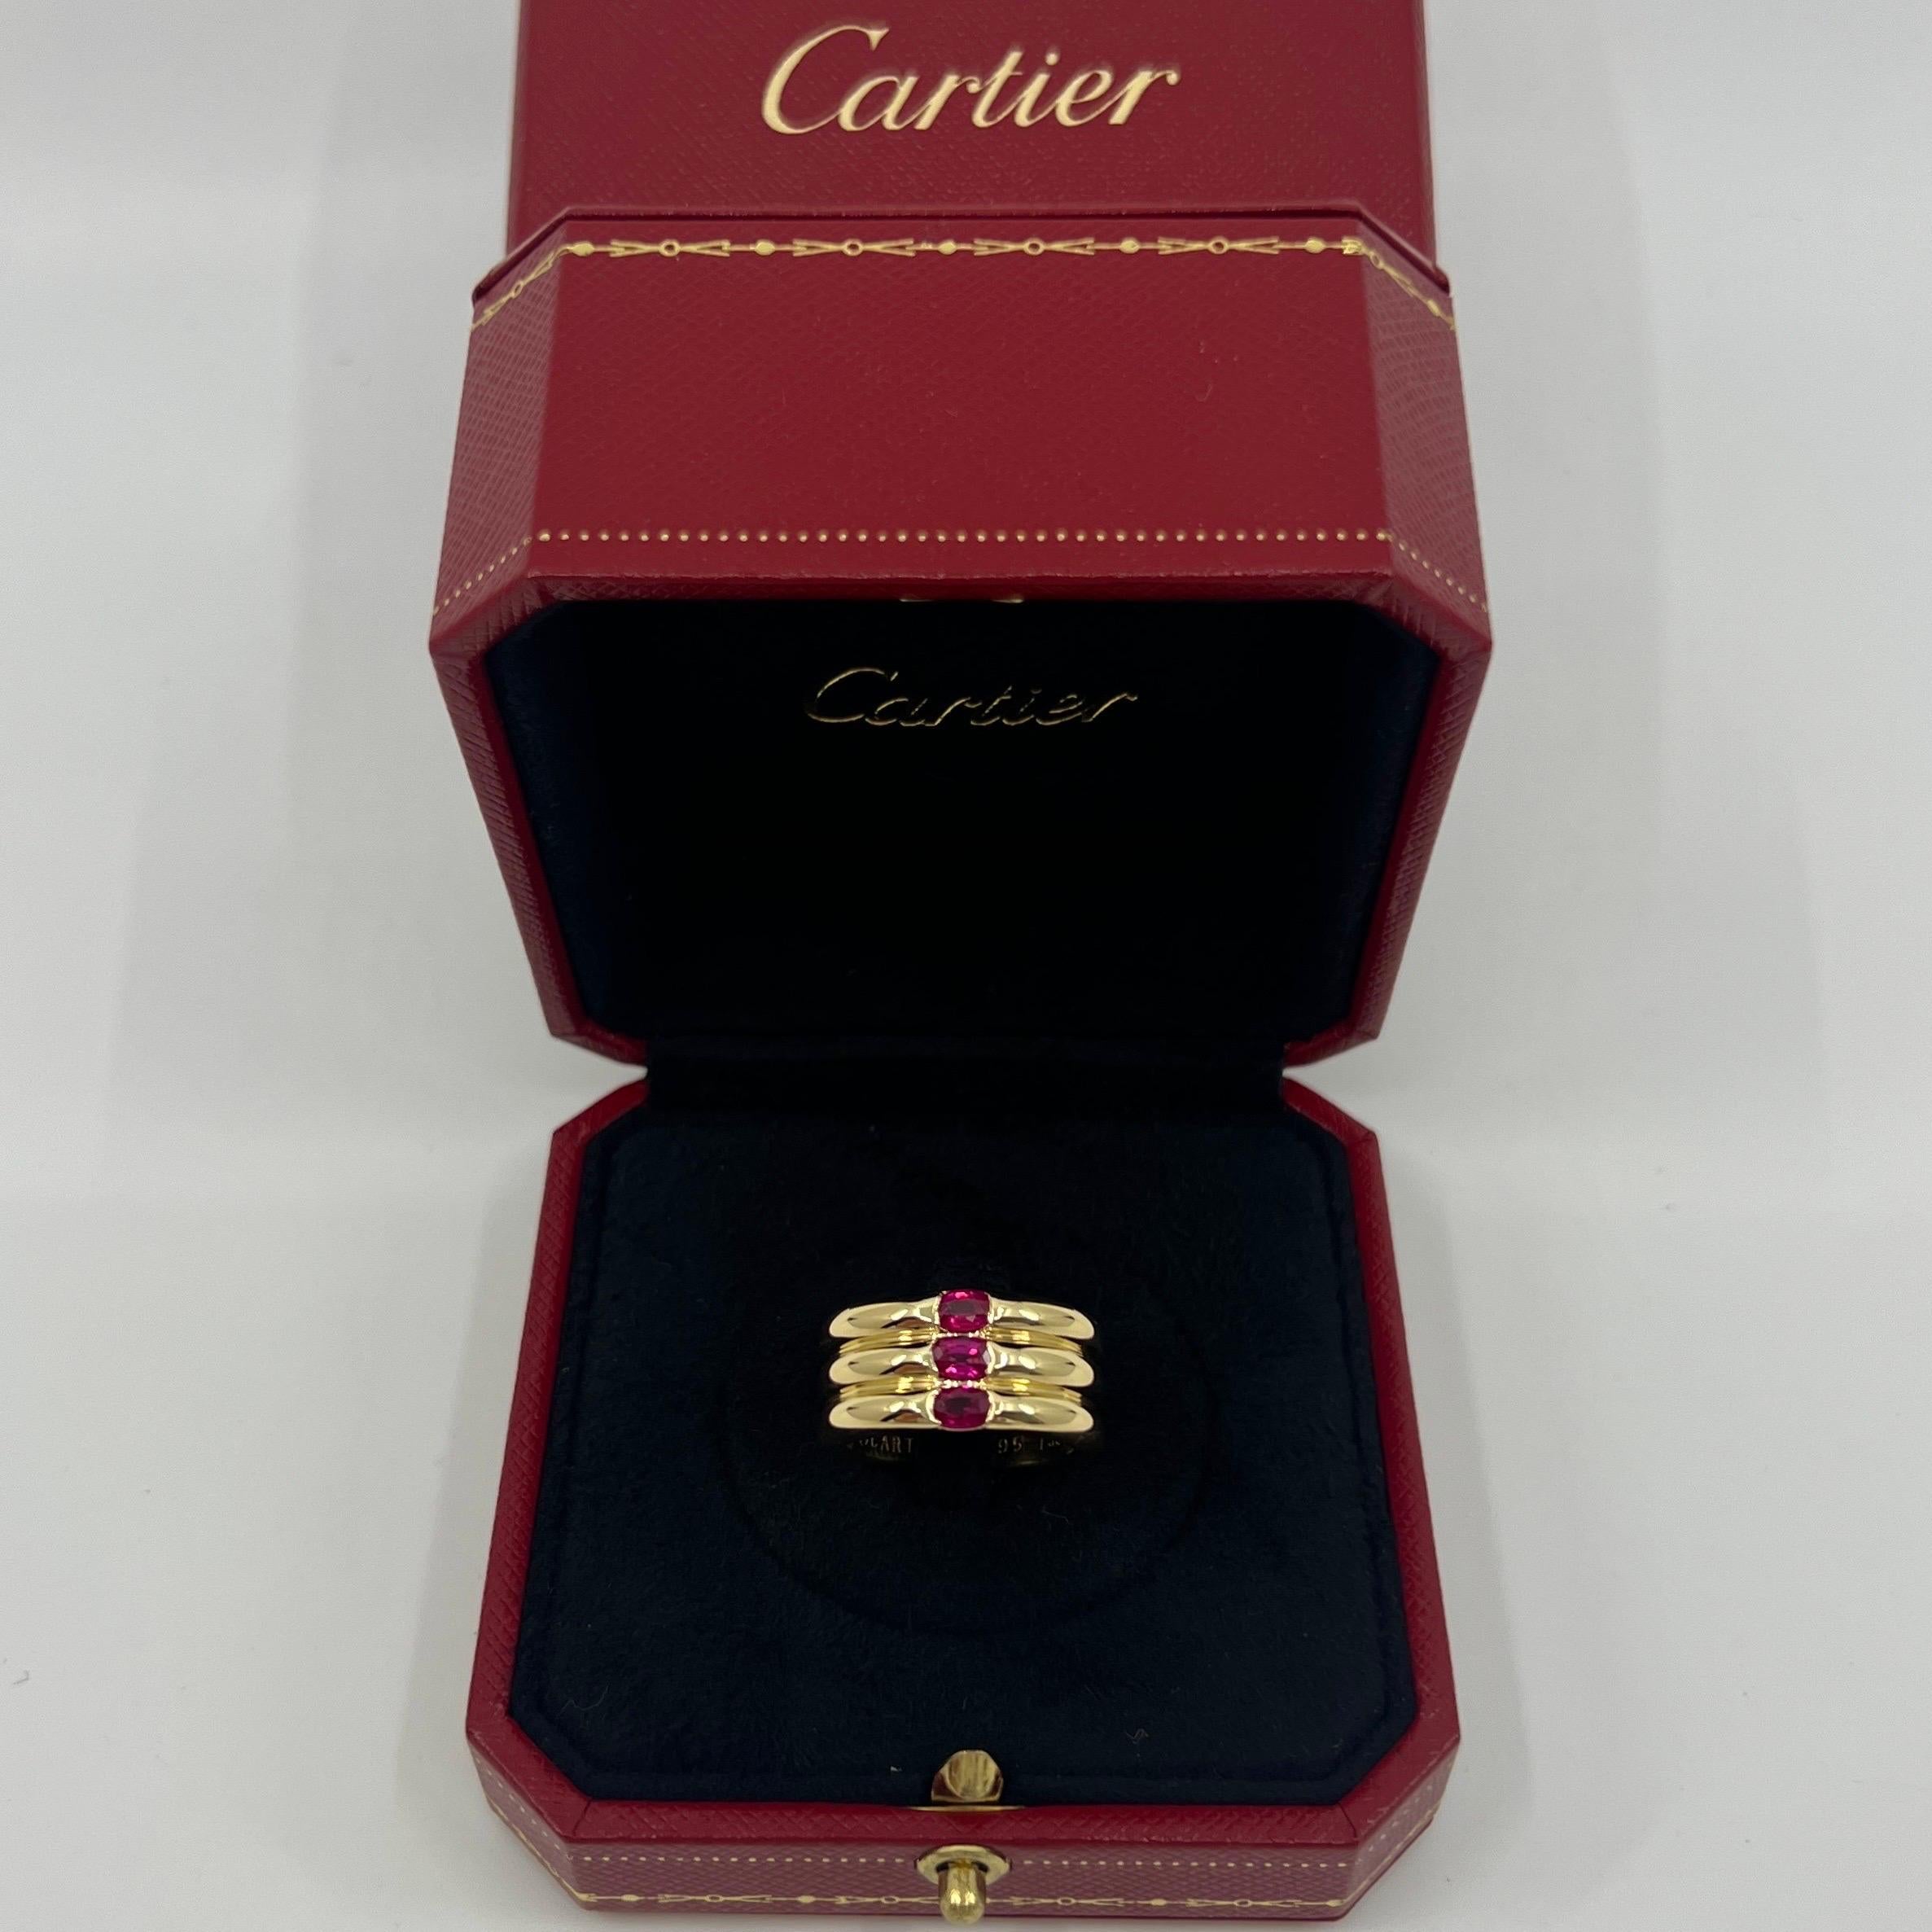 Rare Vintage Cartier Oval Cut Ruby 18k Yellow Gold Three Stone Band Ring.

Stunning yellow gold Cartier ring set with three fine vivid pinkish red rubies. Fine jewellery houses like Cartier only use the finest of gemstones and these rubies are no